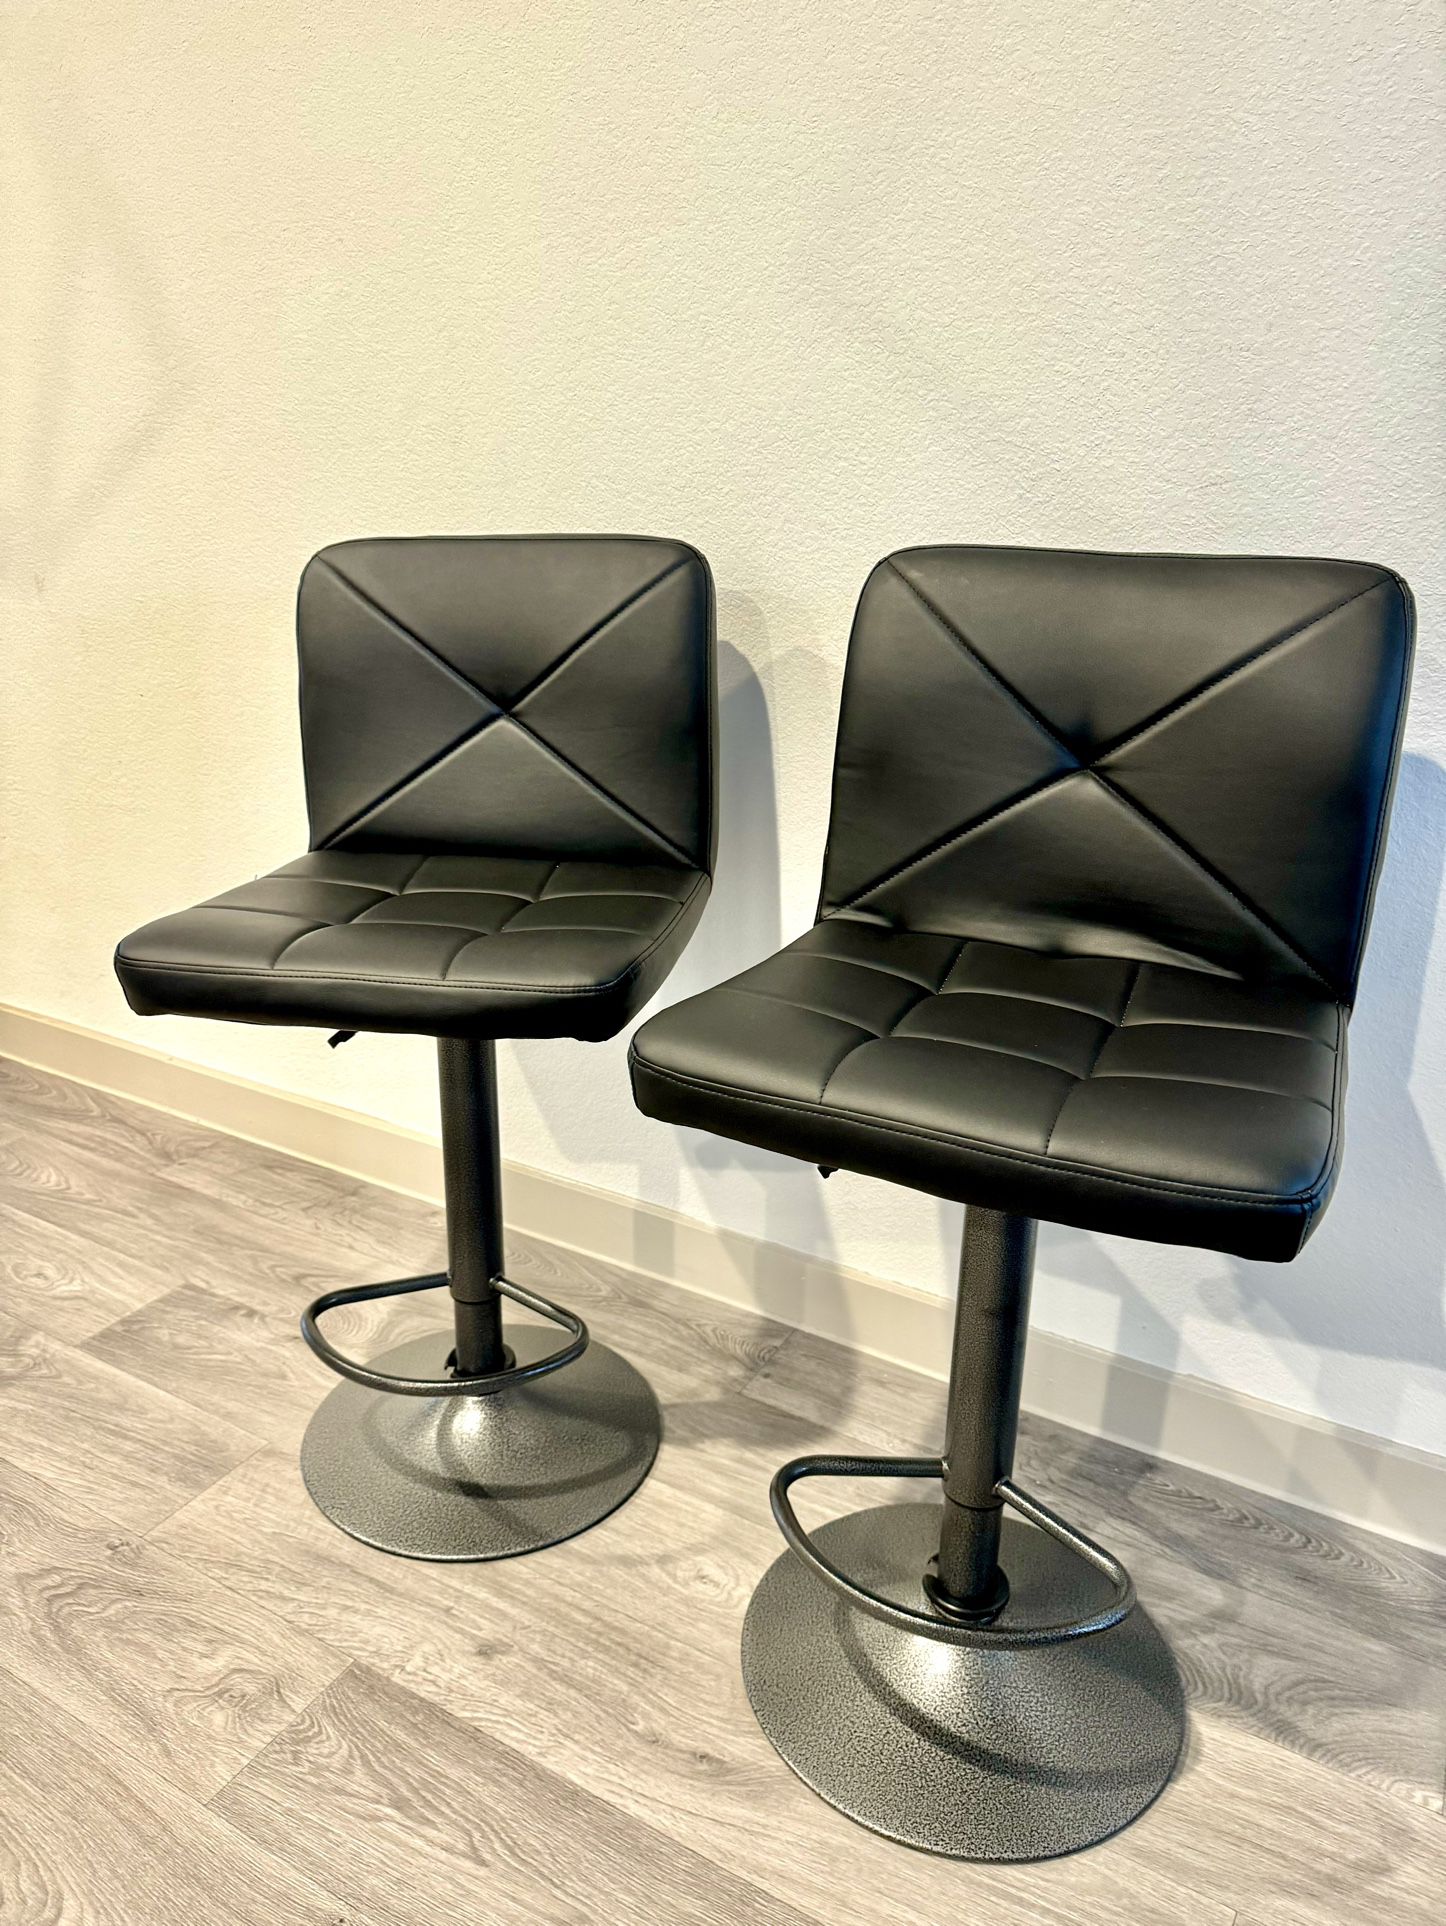 Black Leather Barstool Chairs!